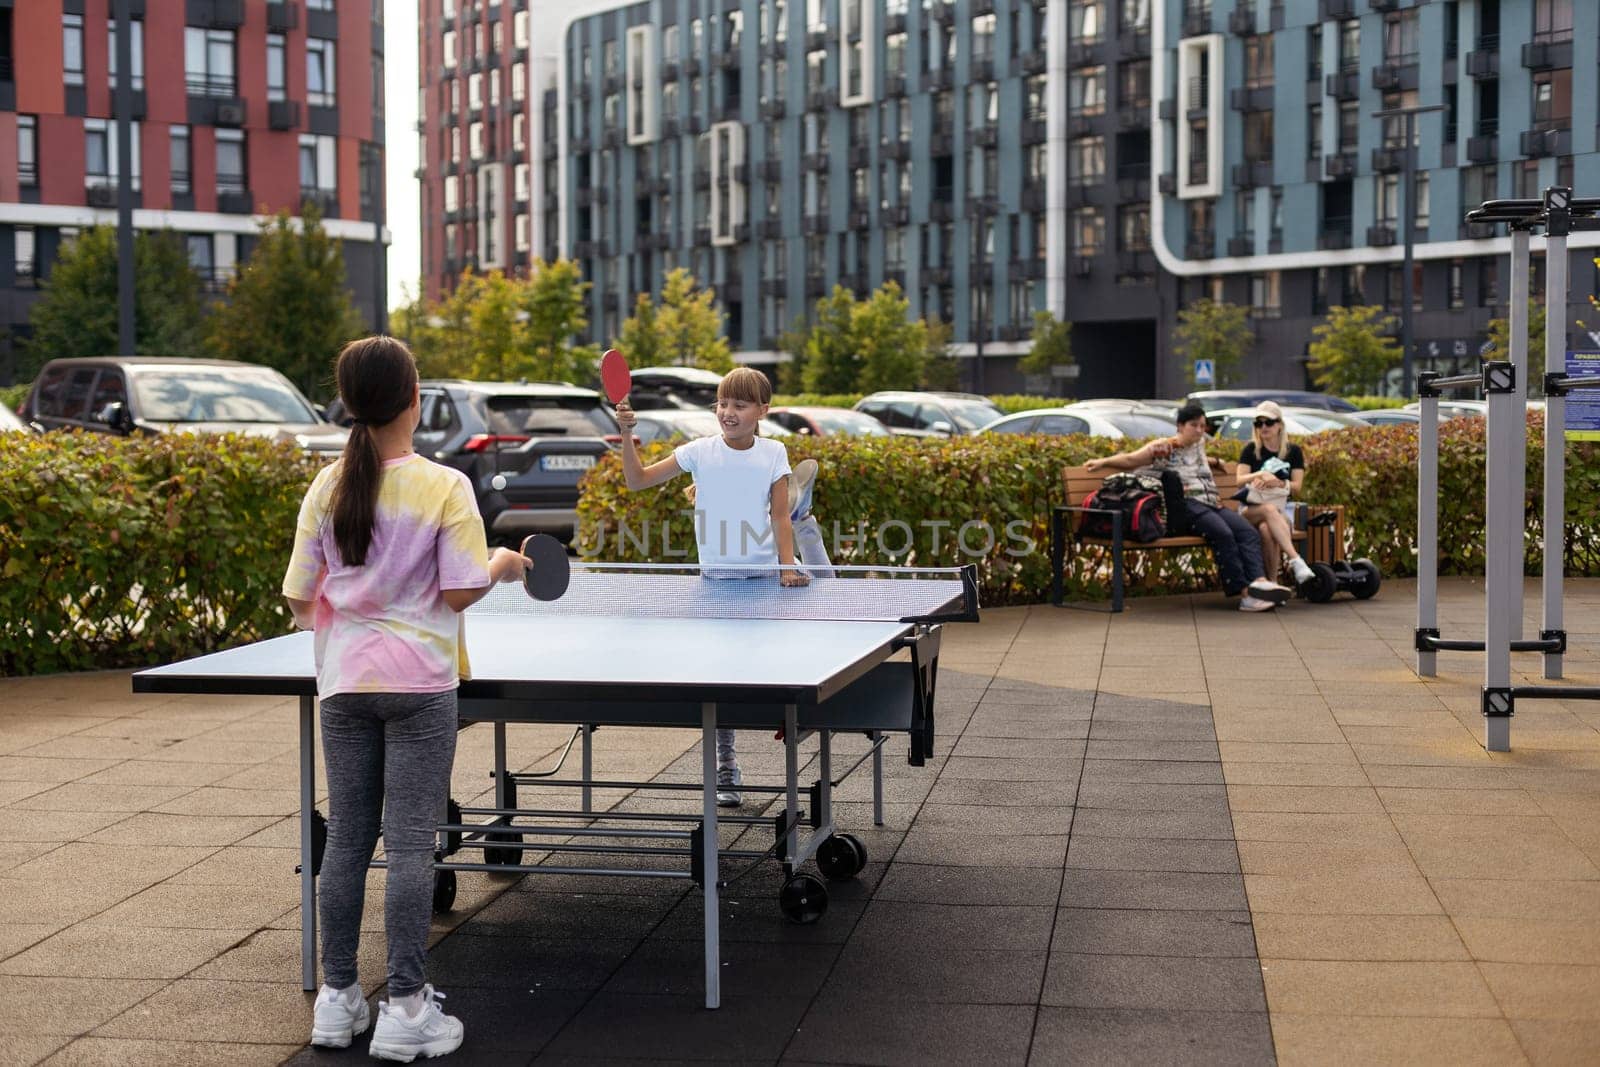 Kid playing table tennis outdoor with family by Andelov13